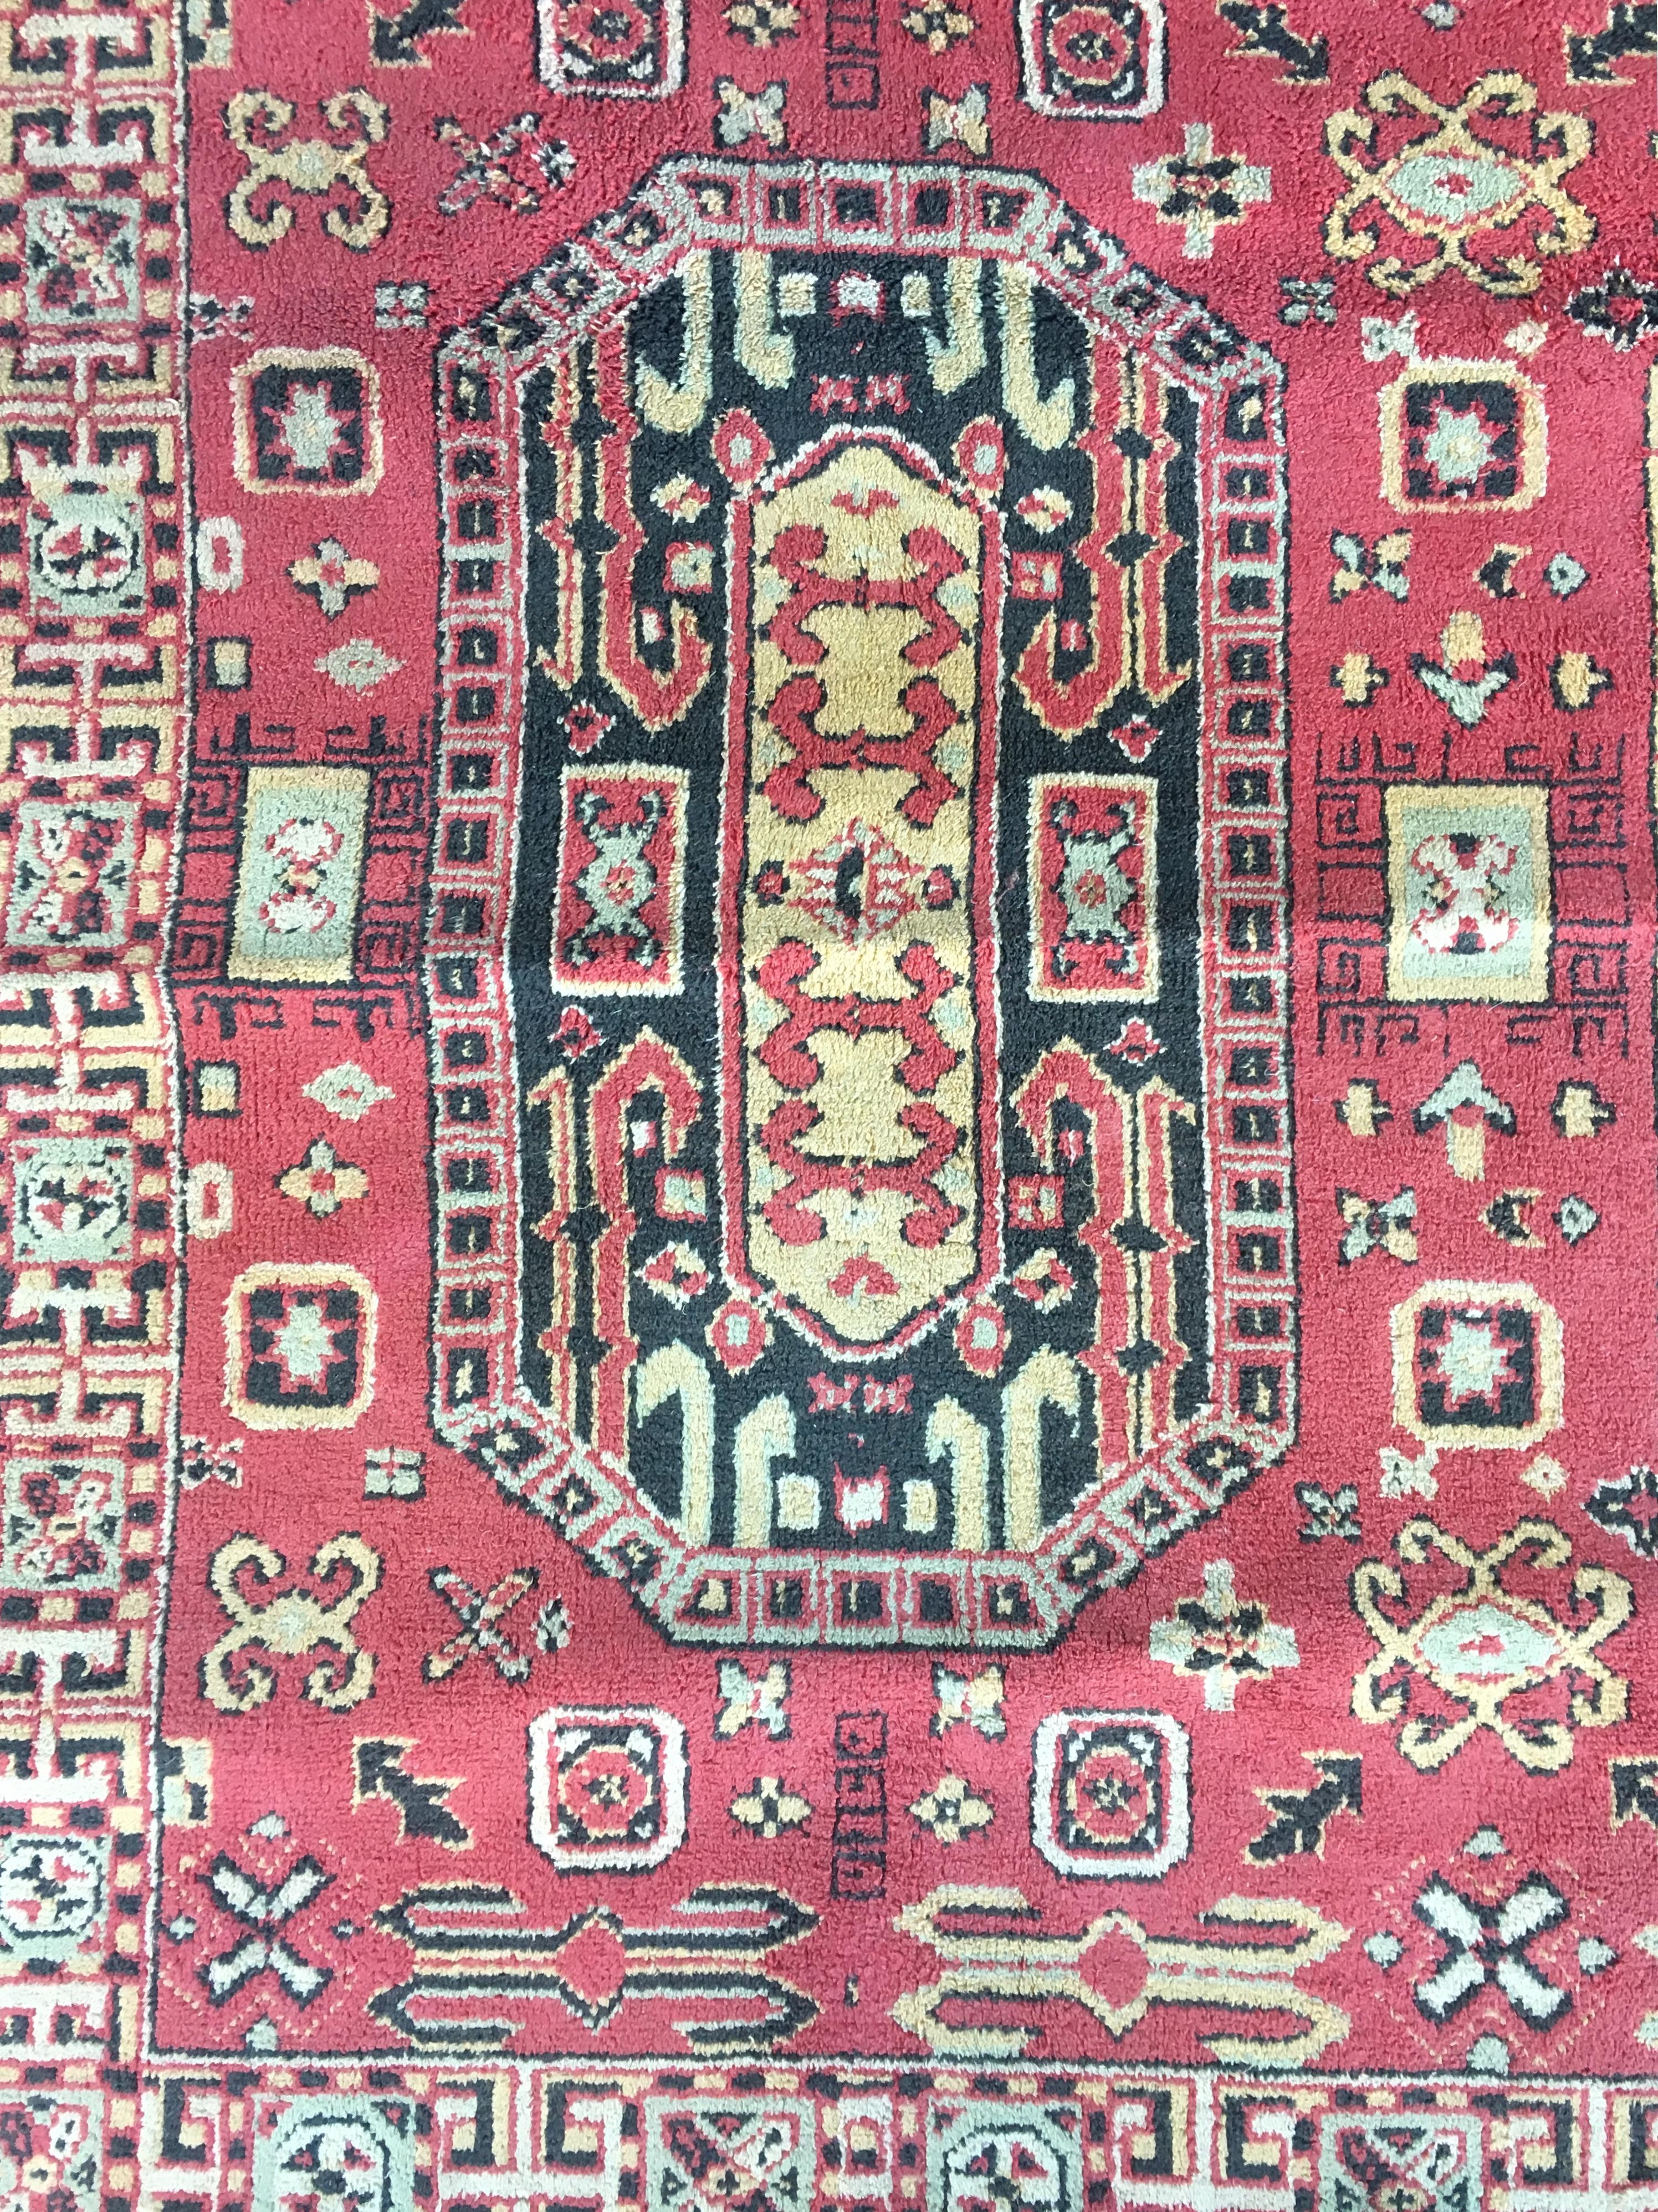 A beautiful throw rug from the early 20th century.

Rendered in variegated shades of ruby red, brass, saffron, coffee, pistachio, sage, gray and beige. Perfect for anywhere: Entry, hall, stair landing, hallway, kitchen, corridor, living room,